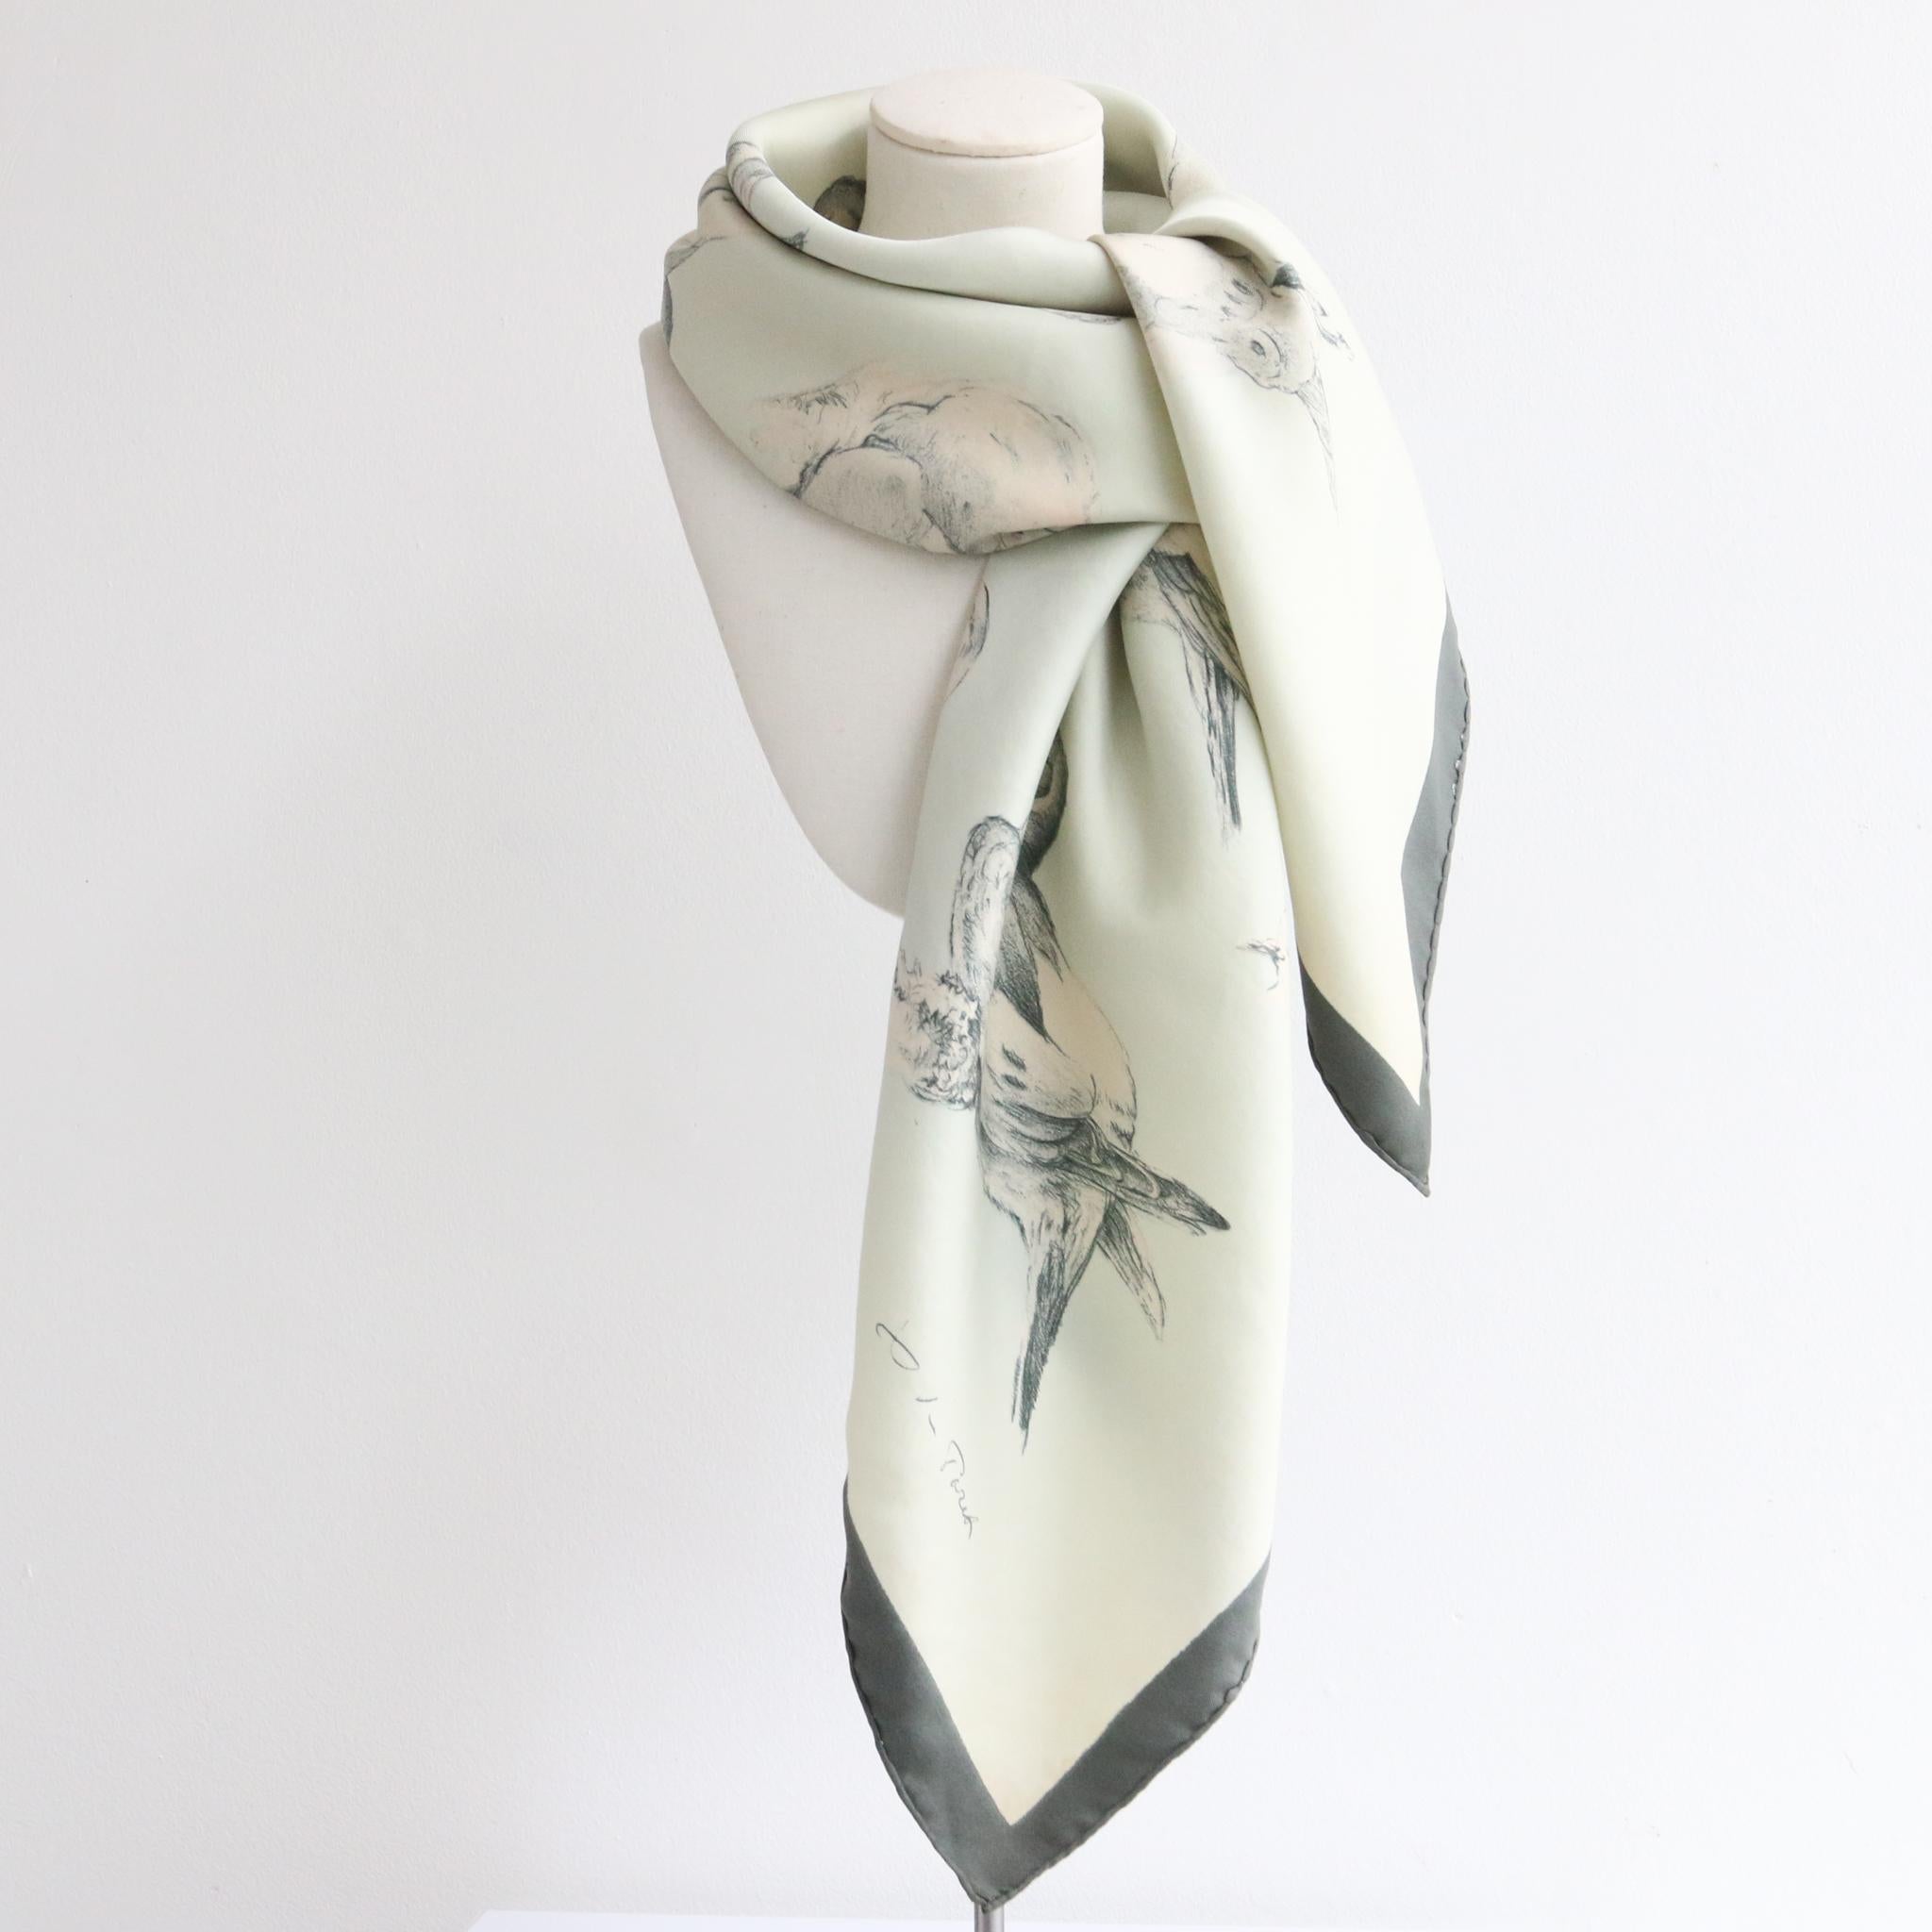 This rare 1956 silk Hermès scarf, designed by Xavier De Poret is the perfect treasure for your wardrobe.

In a light duck egg blue with a dark teal trim, this beautiful scarf is adorned with sketched illustrations of turtle doves in a dark teal,